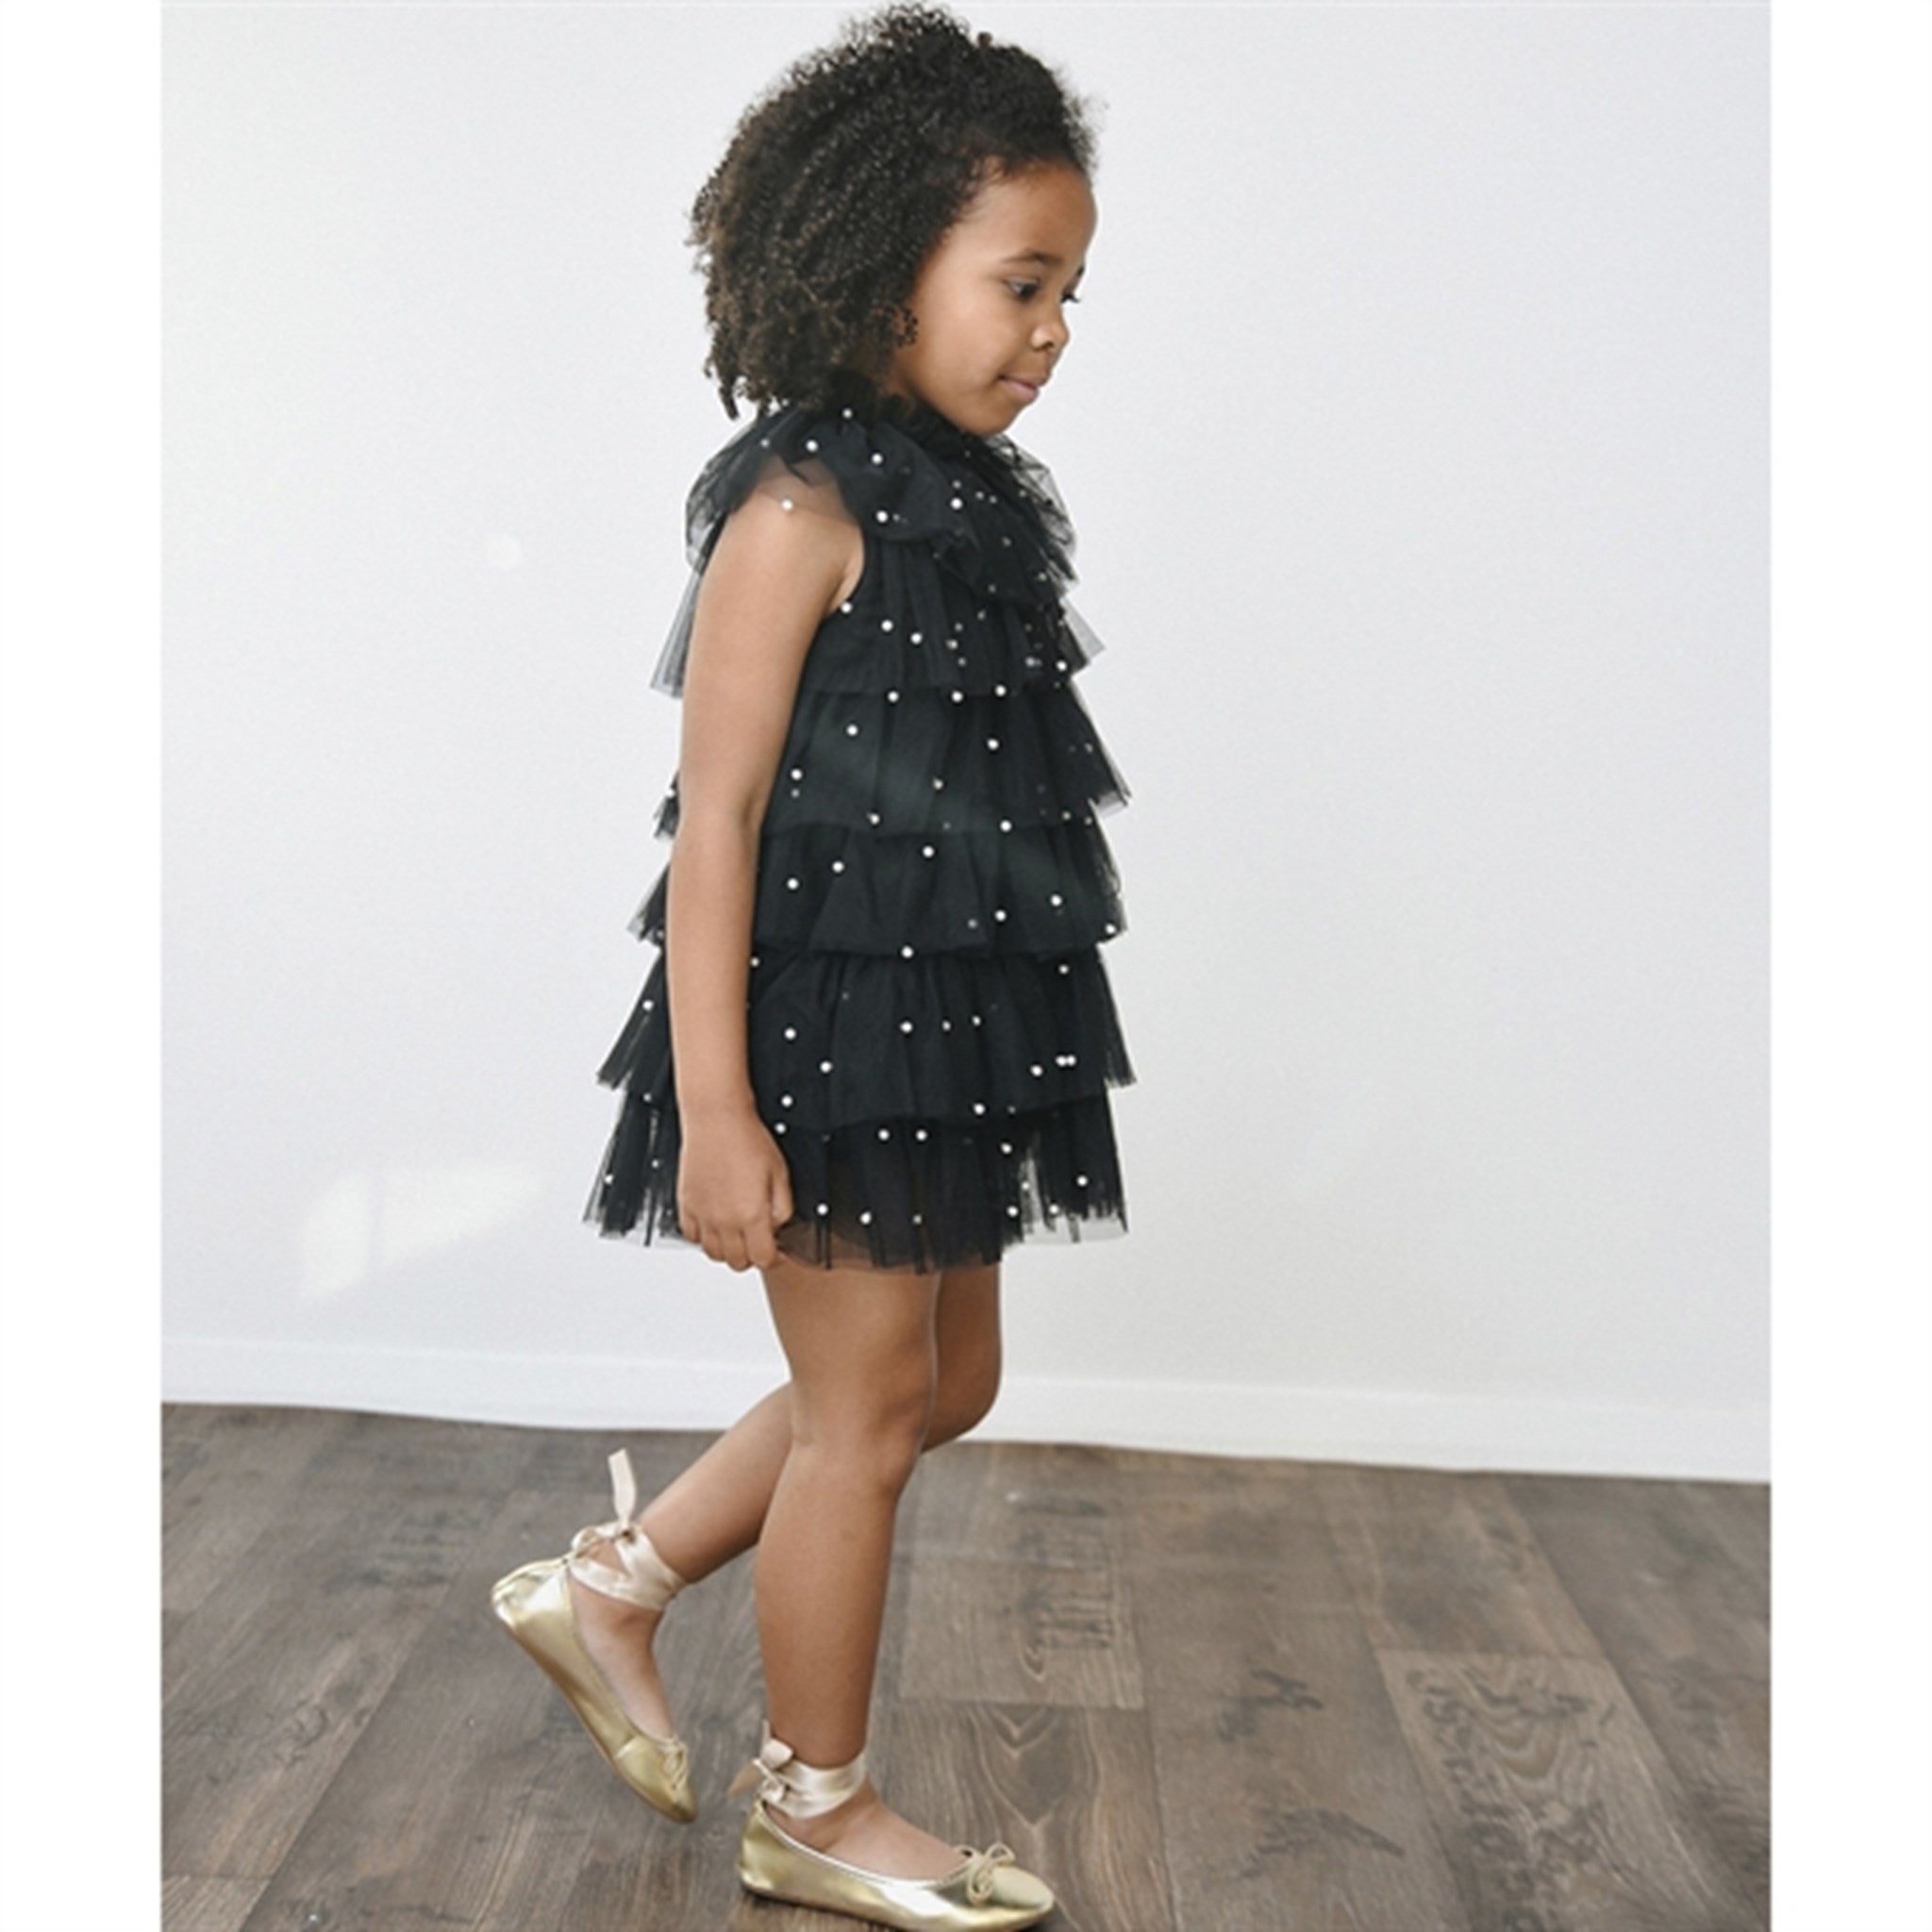 Dolly by Le Petit Tom Pearl Tutully Tiered Tulle Tuttu Klänning Black 5